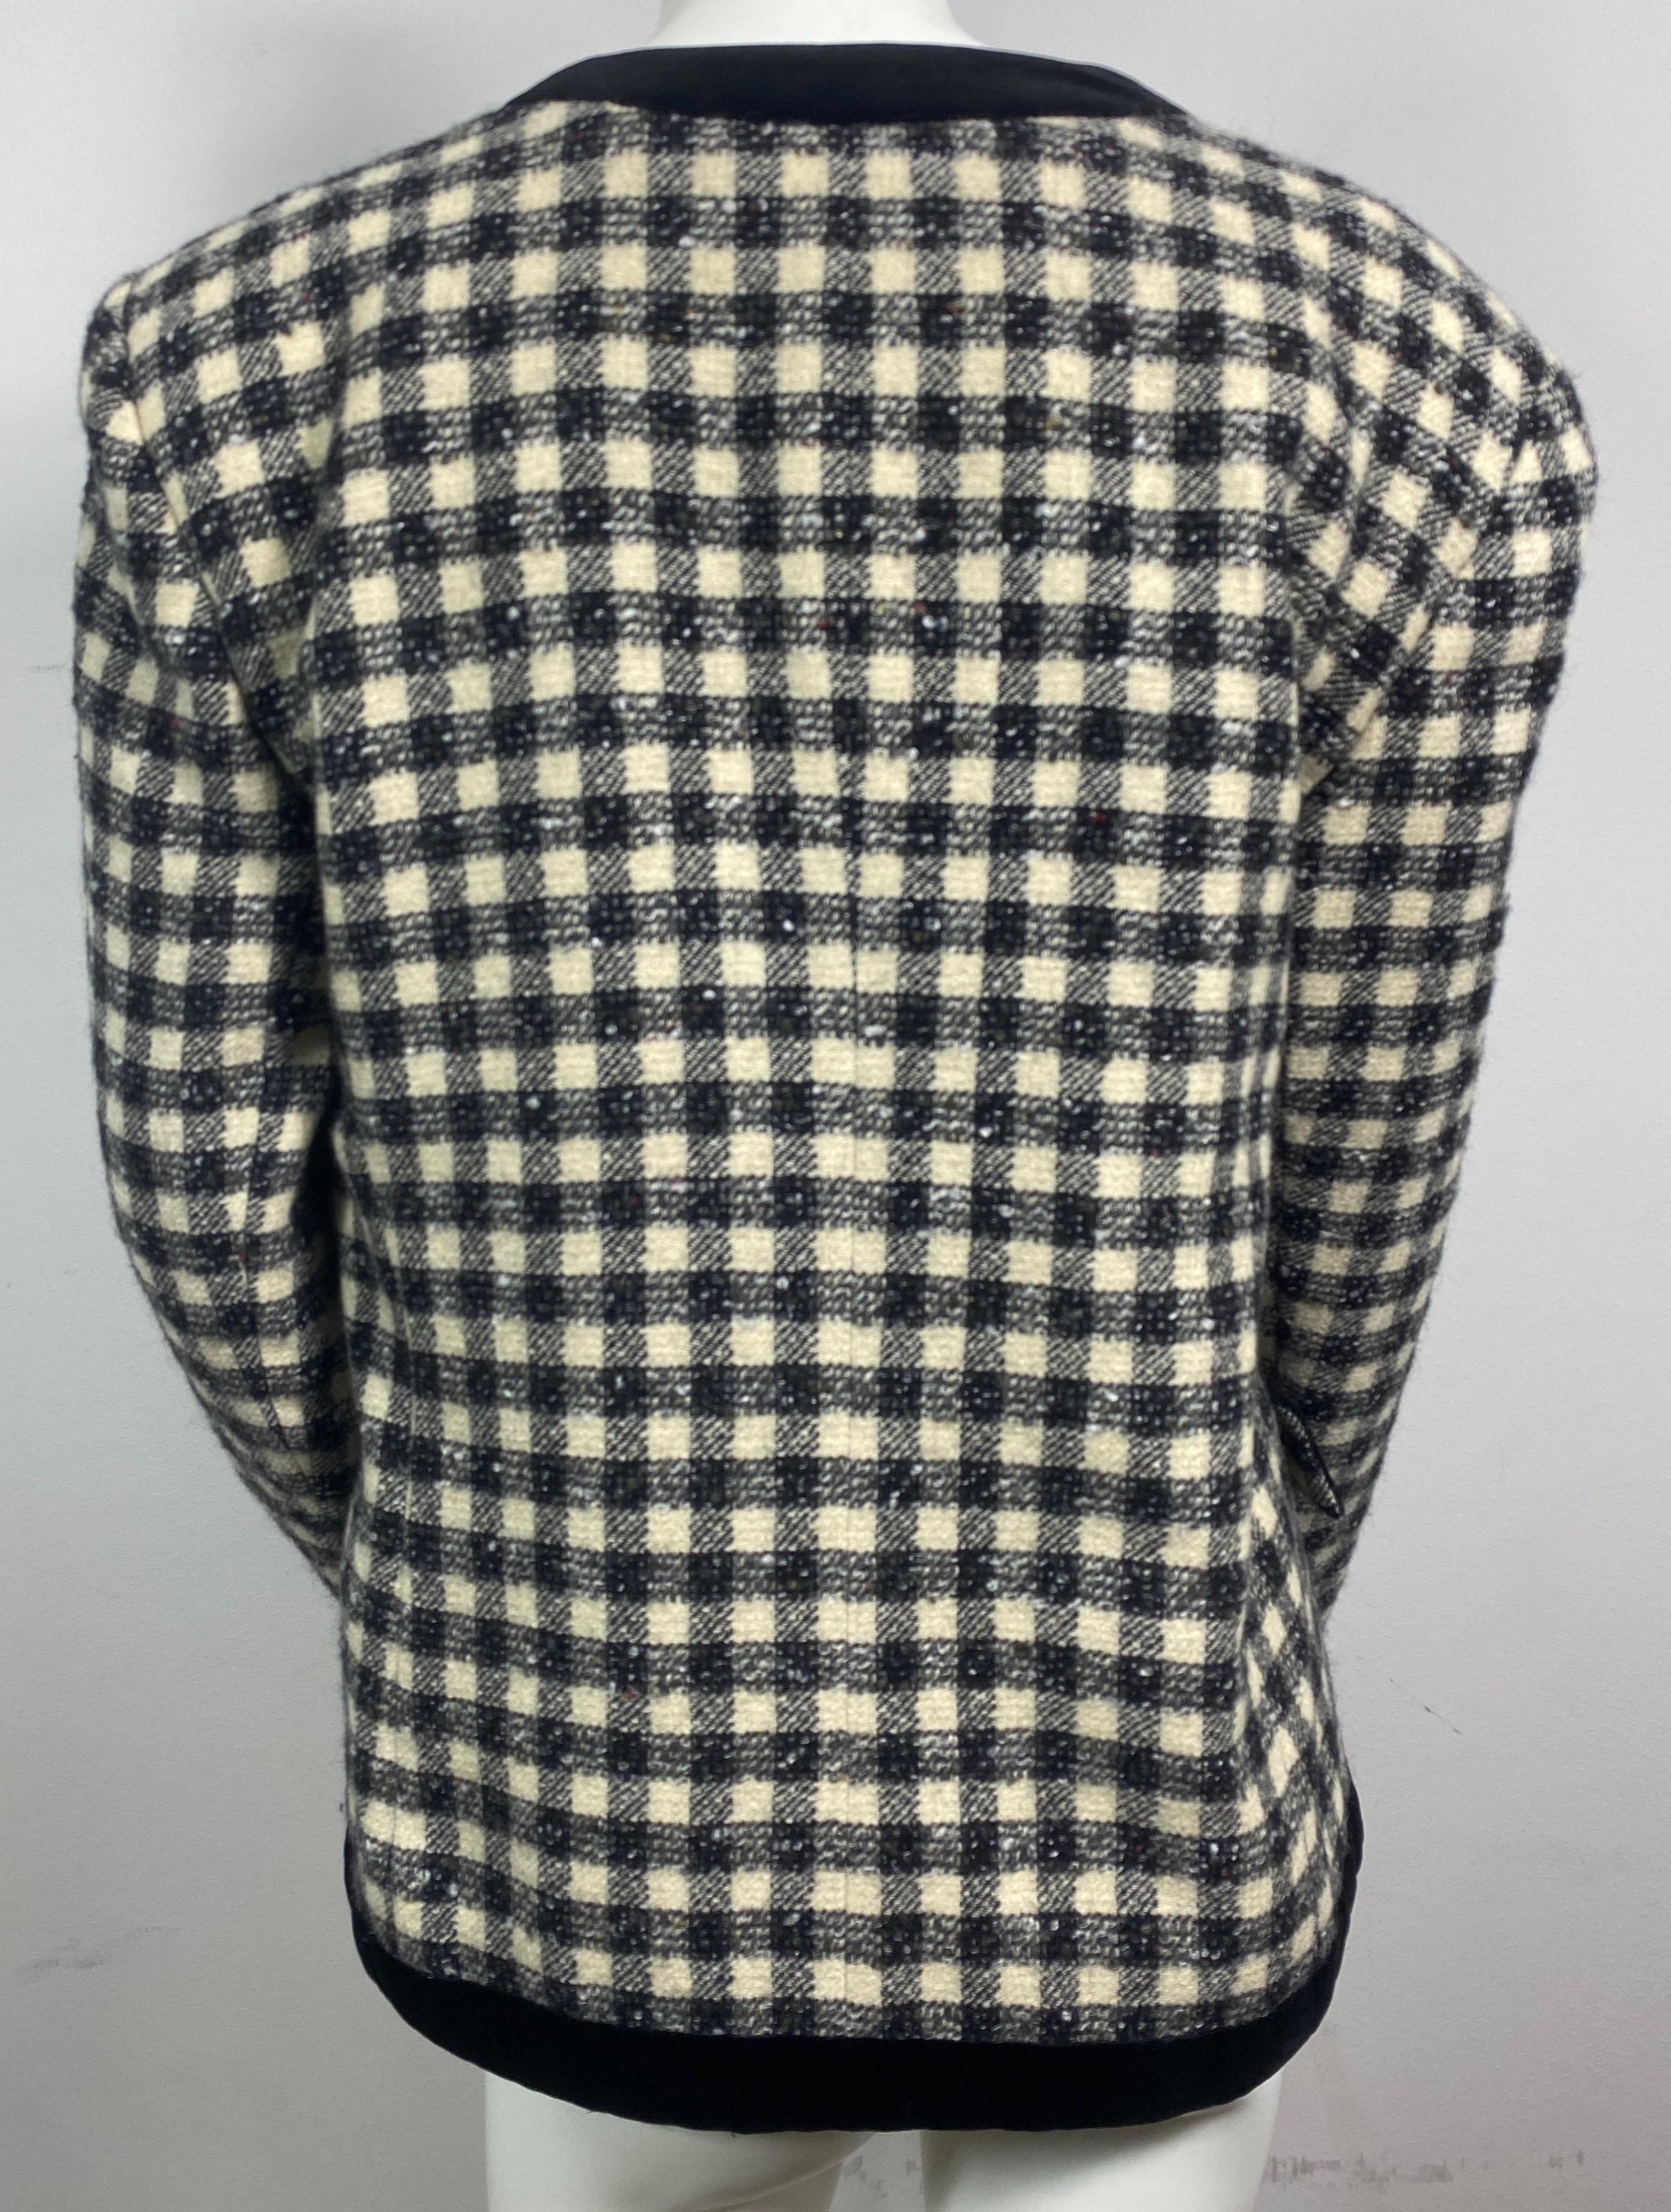 Giorgio Armani 1990’s Black and Ivory Tweed and Velvet Checkered Jacket -Size 46 For Sale 4